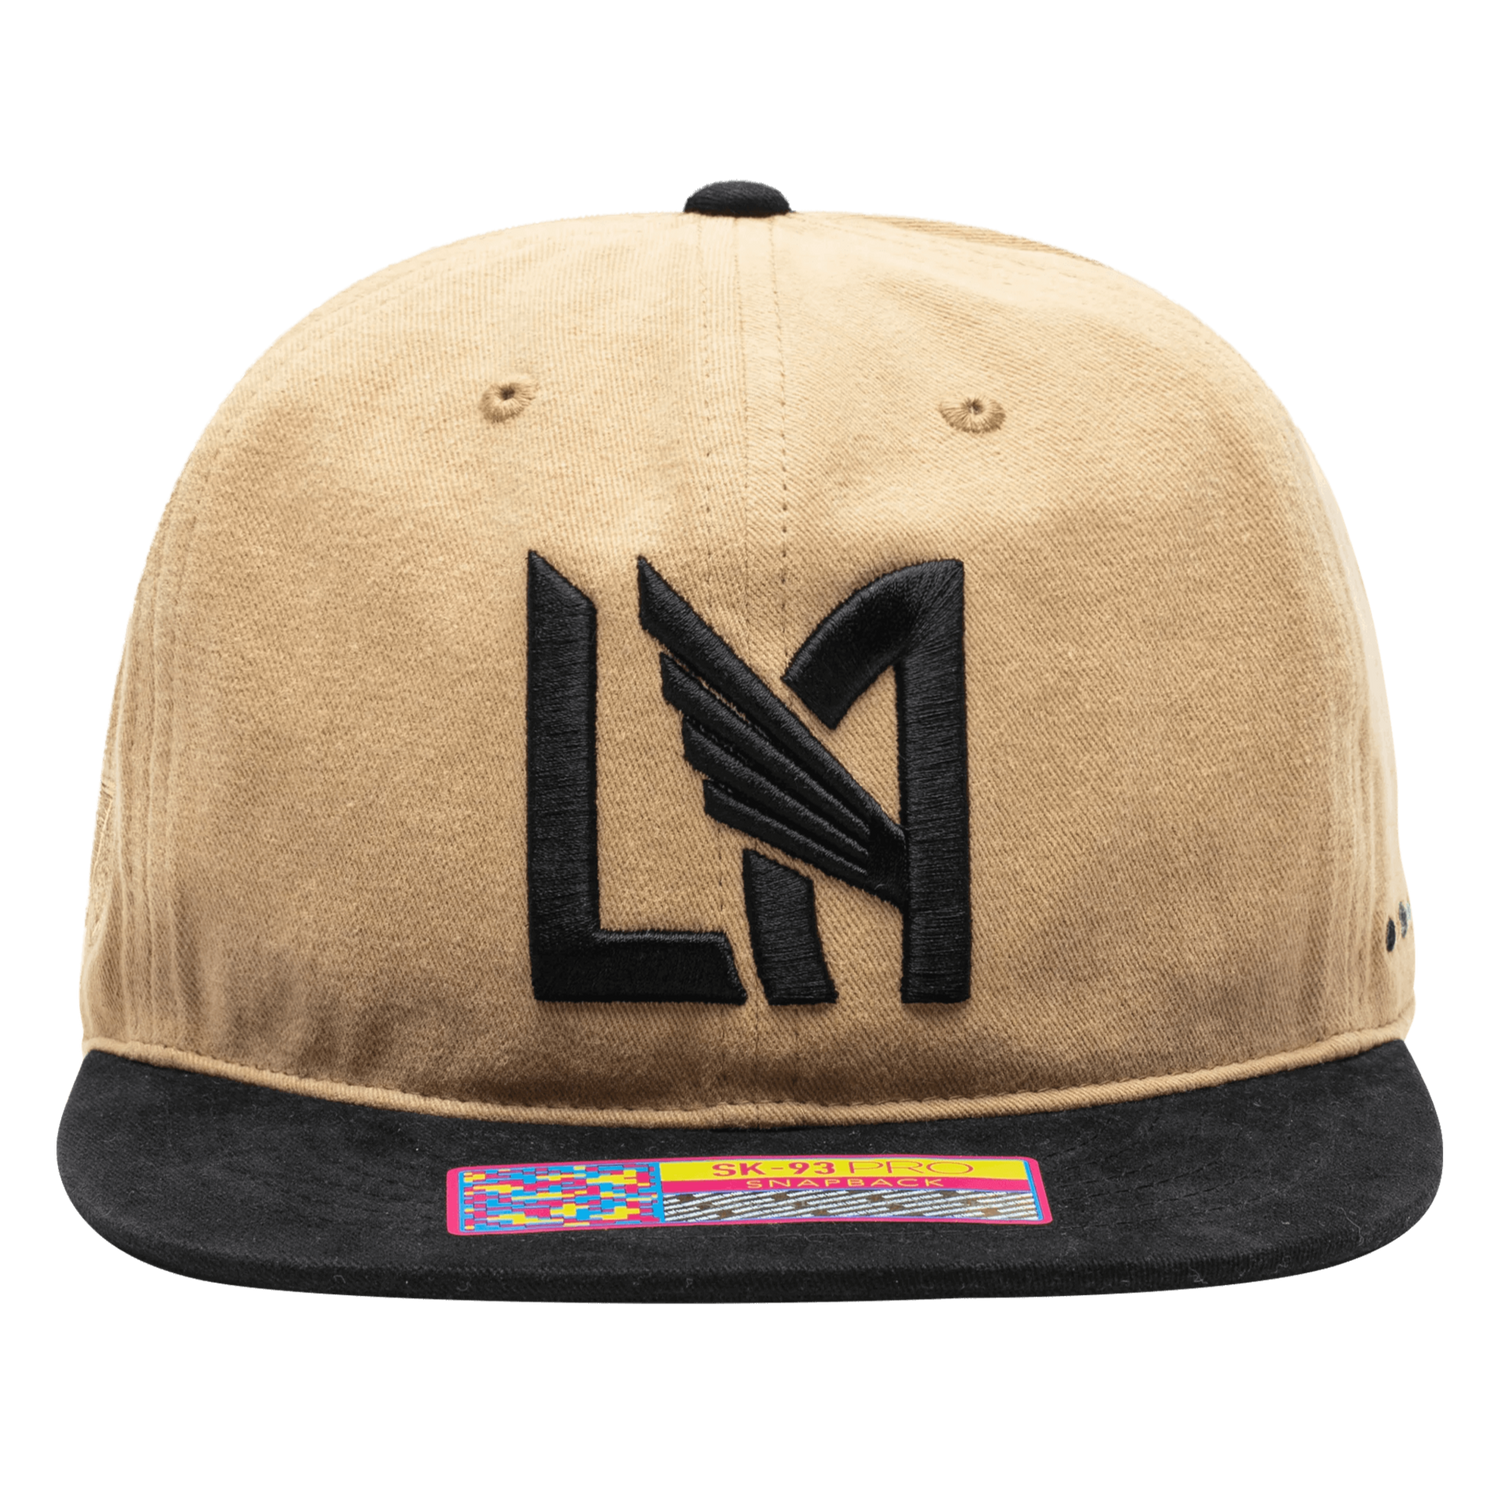 FI Collection LAFC Swingman Snapback Hat (Front)